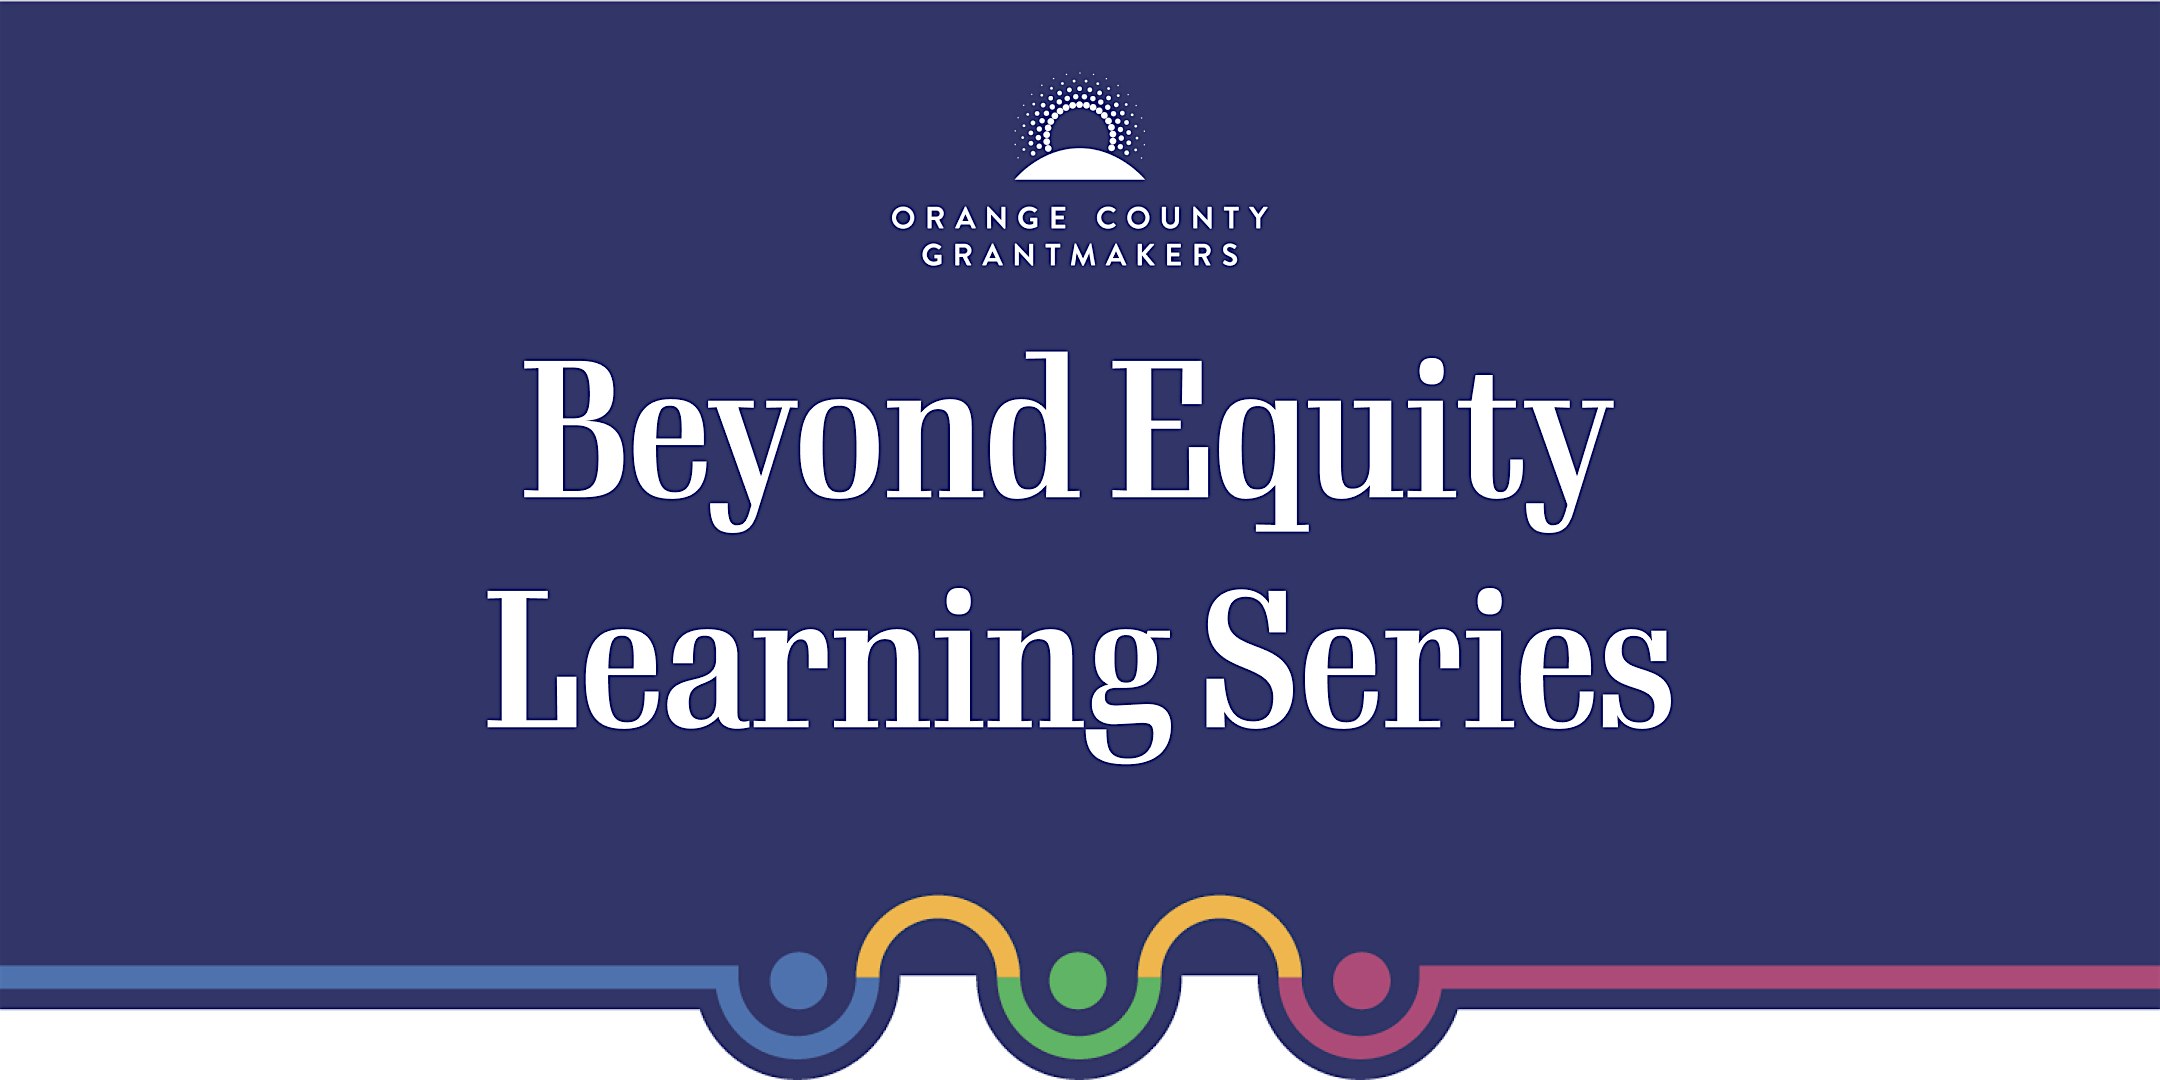 Beyond Equity Learning Series